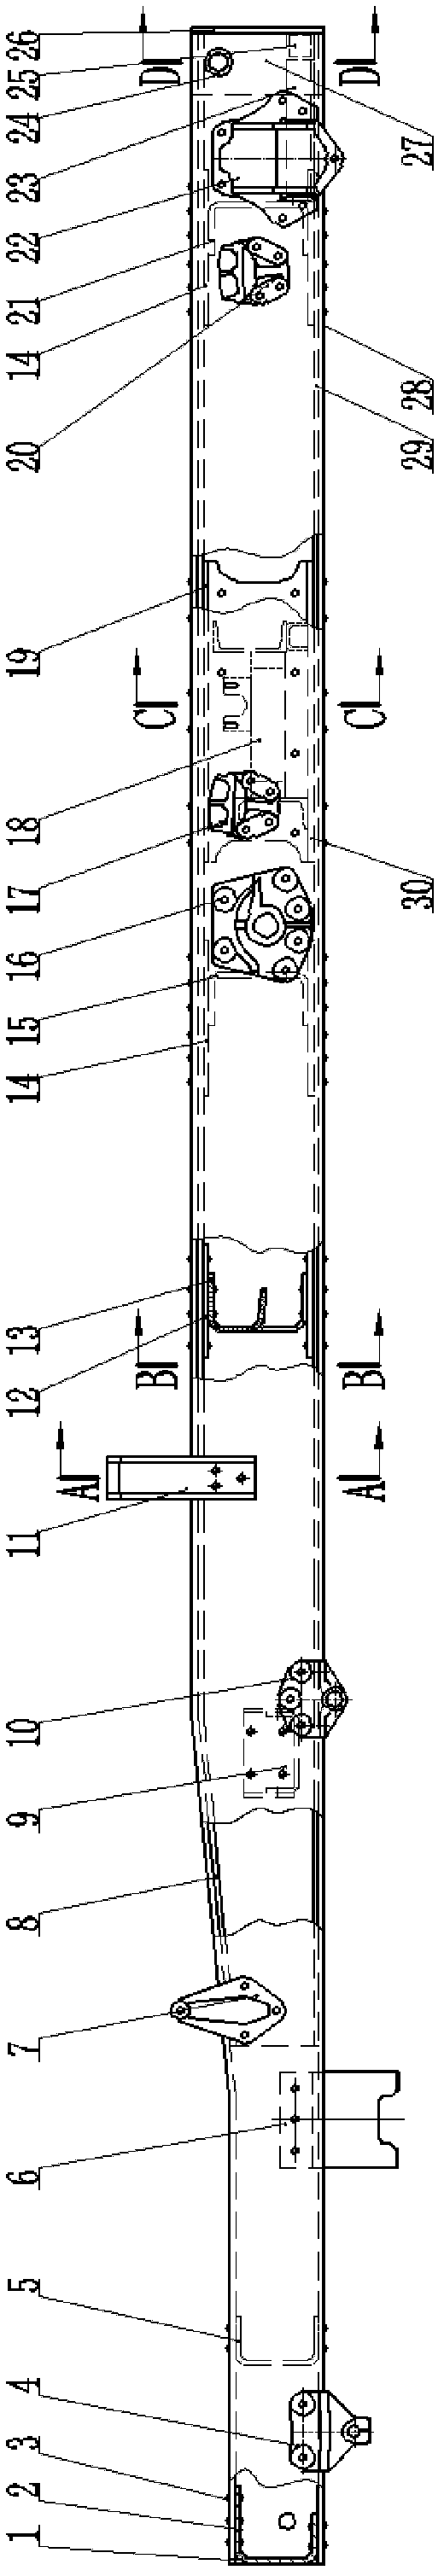 Dump truck frame with function of auxiliary frame